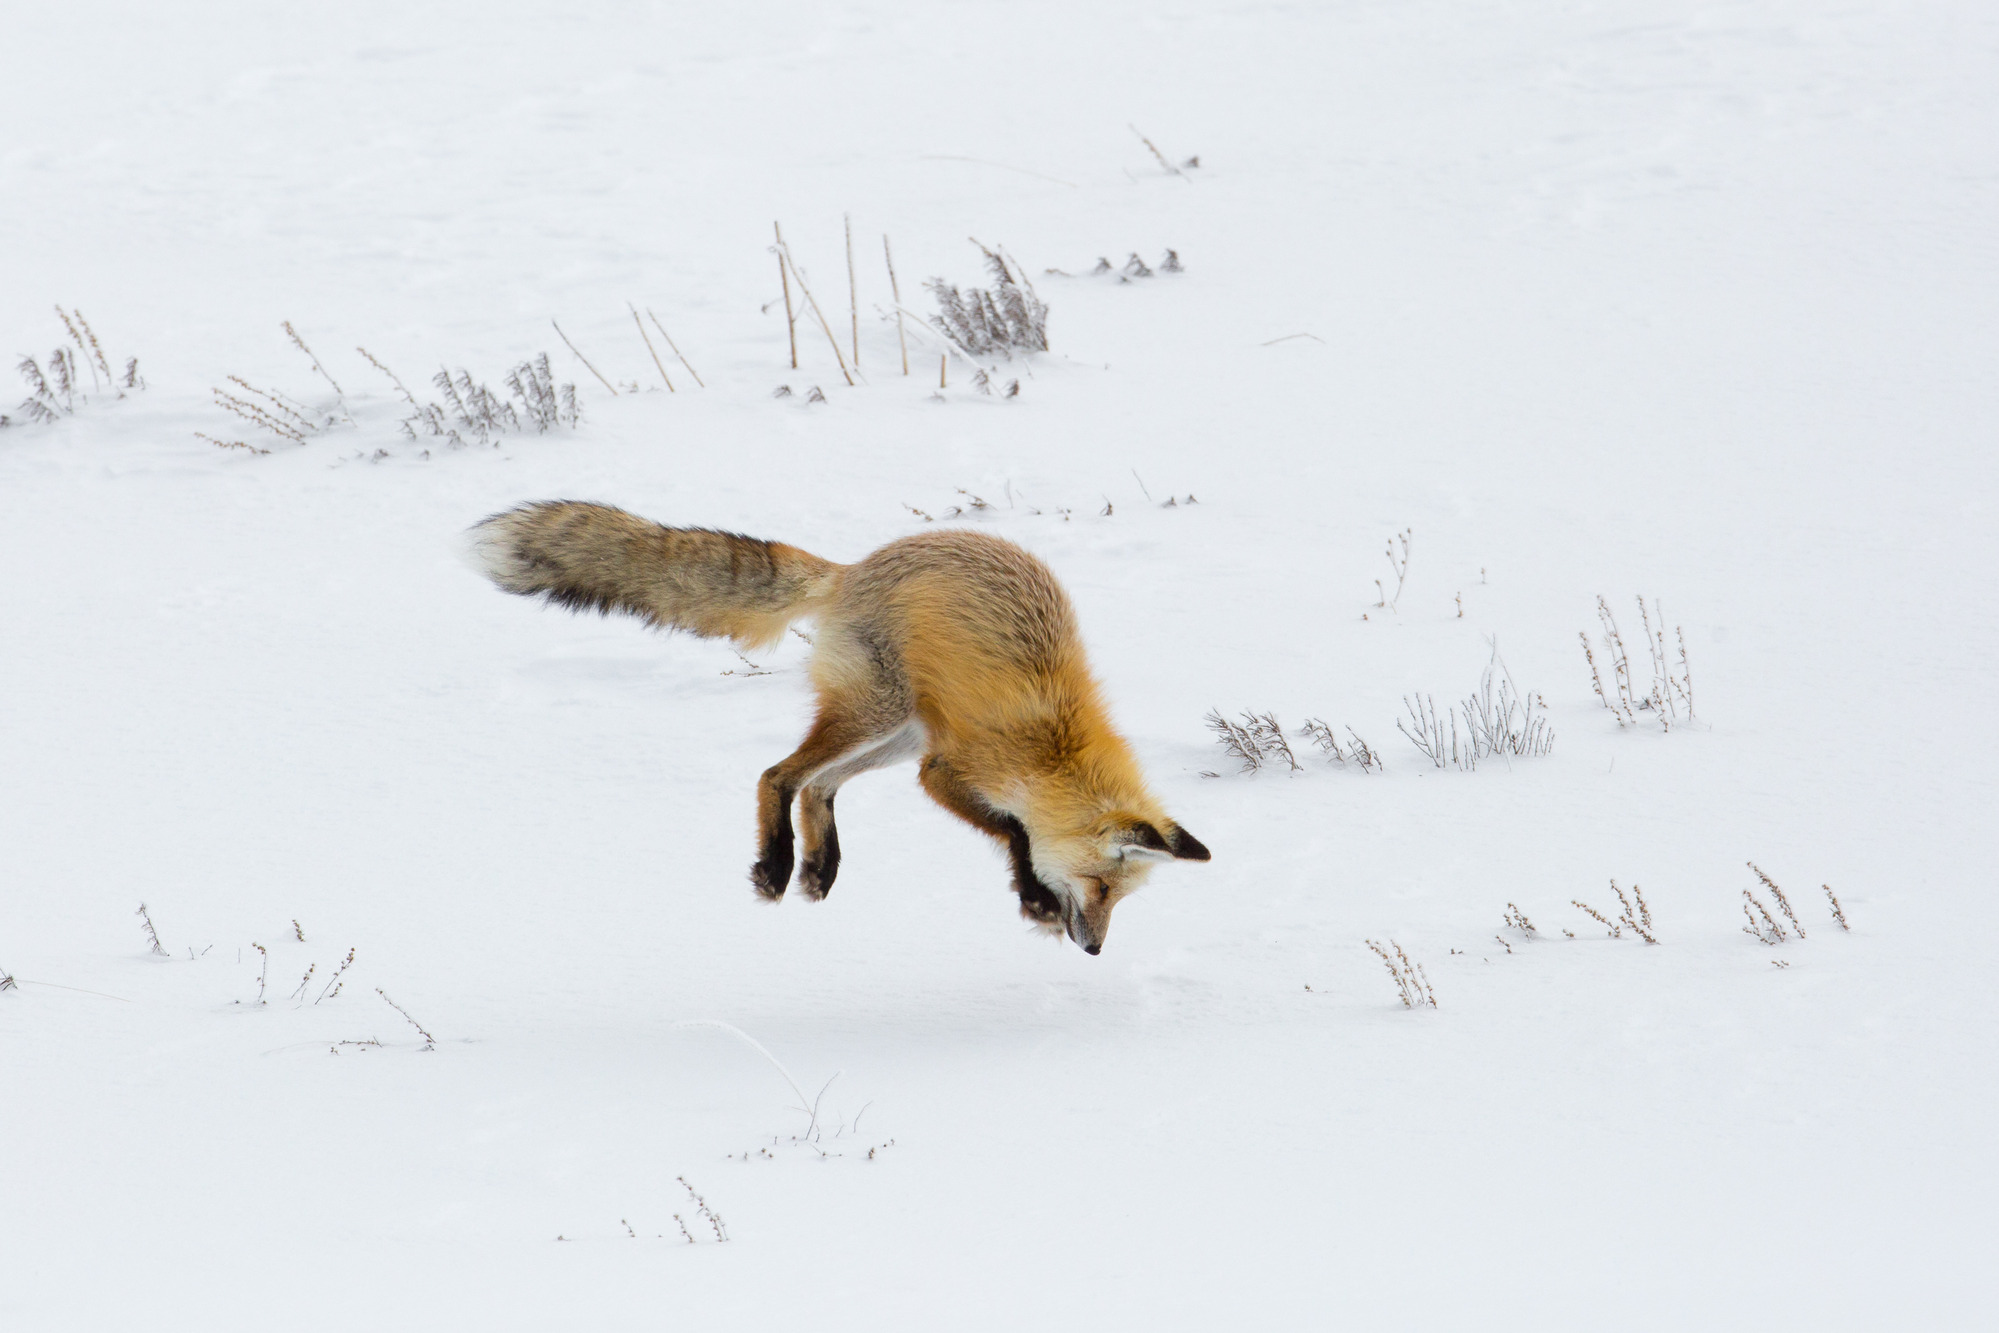 Fox is in air ready to hit the snow in a dive for prey.